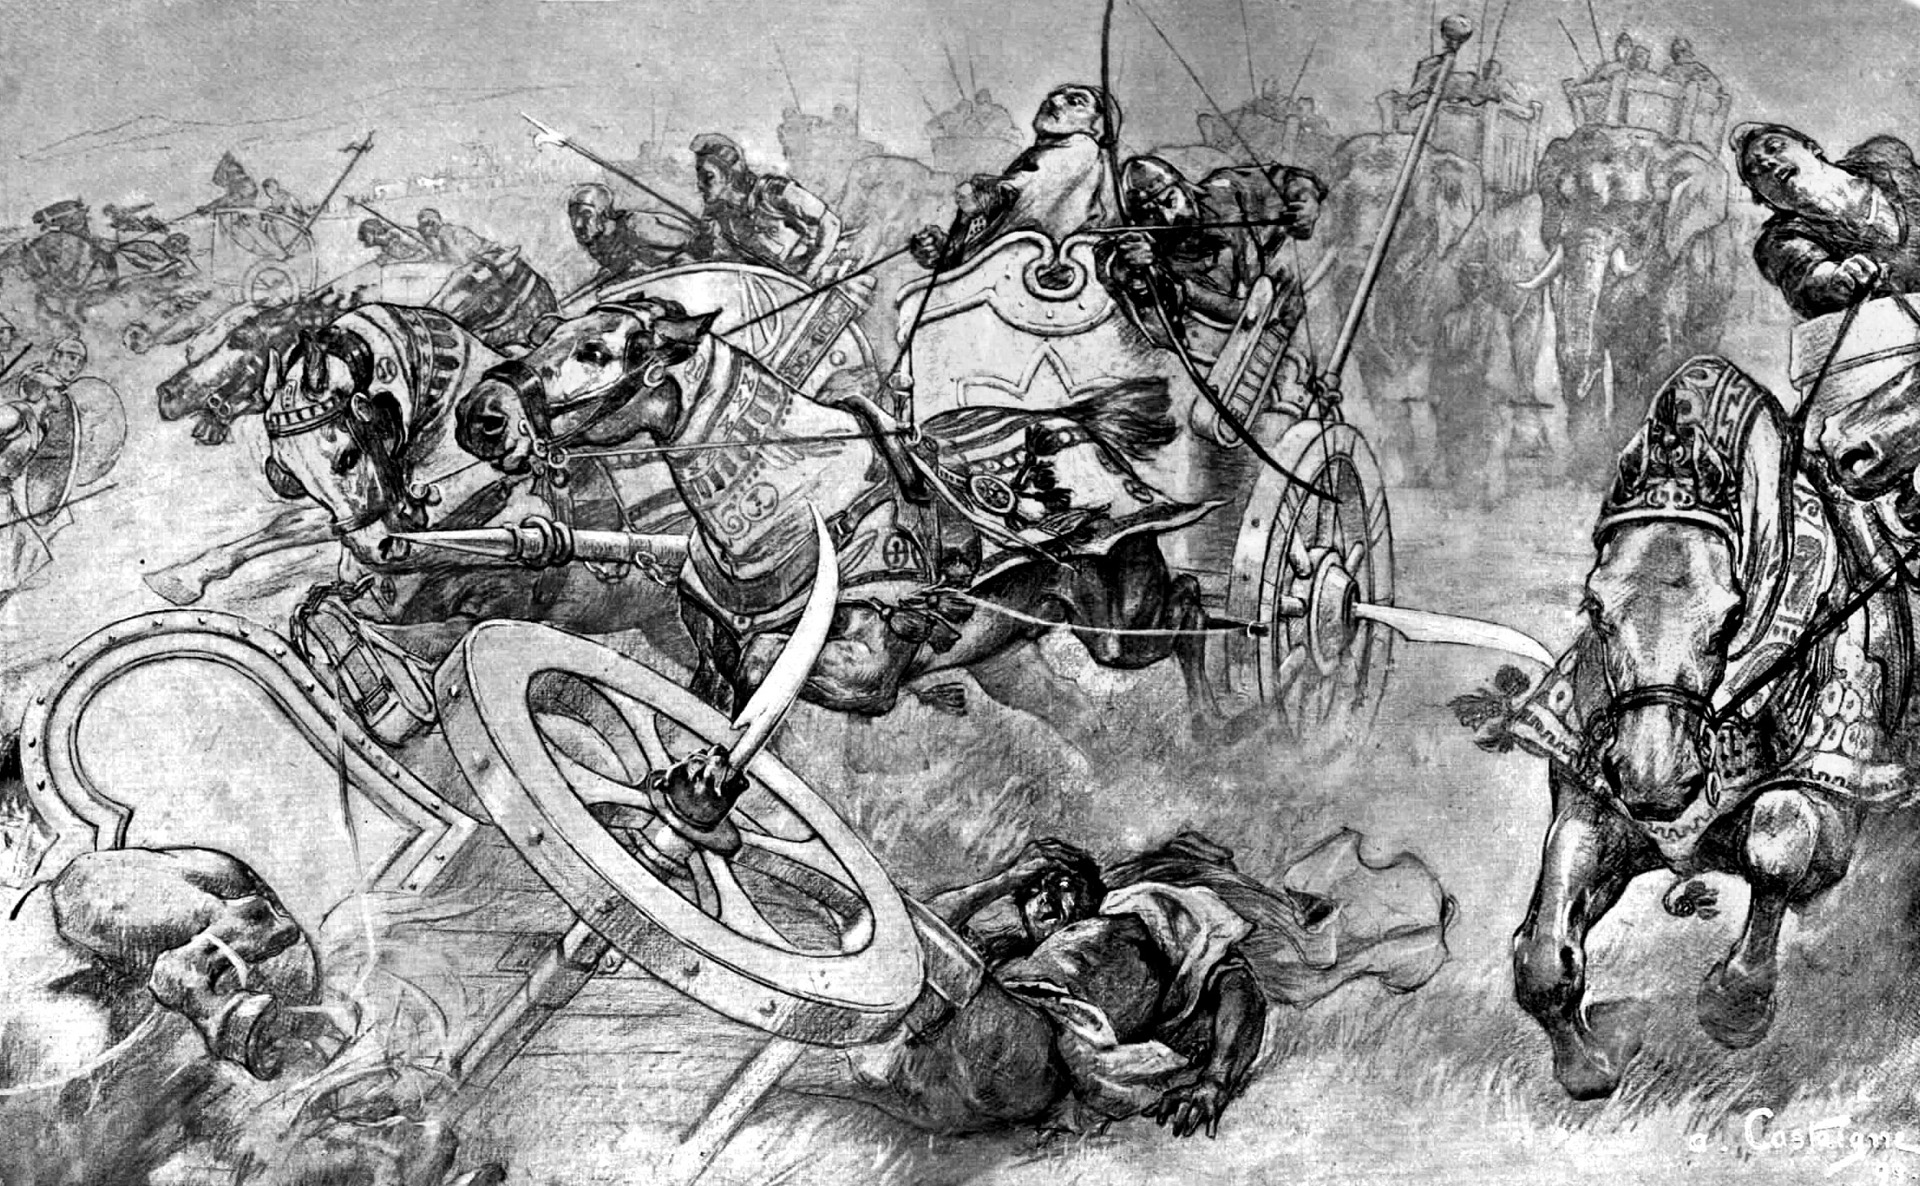 Alexander had drilled his men in countermeasures to disrupt the charge of Darius' 200 scythed chariots, and as a result only a small number harmed the Macedonian infantry. 